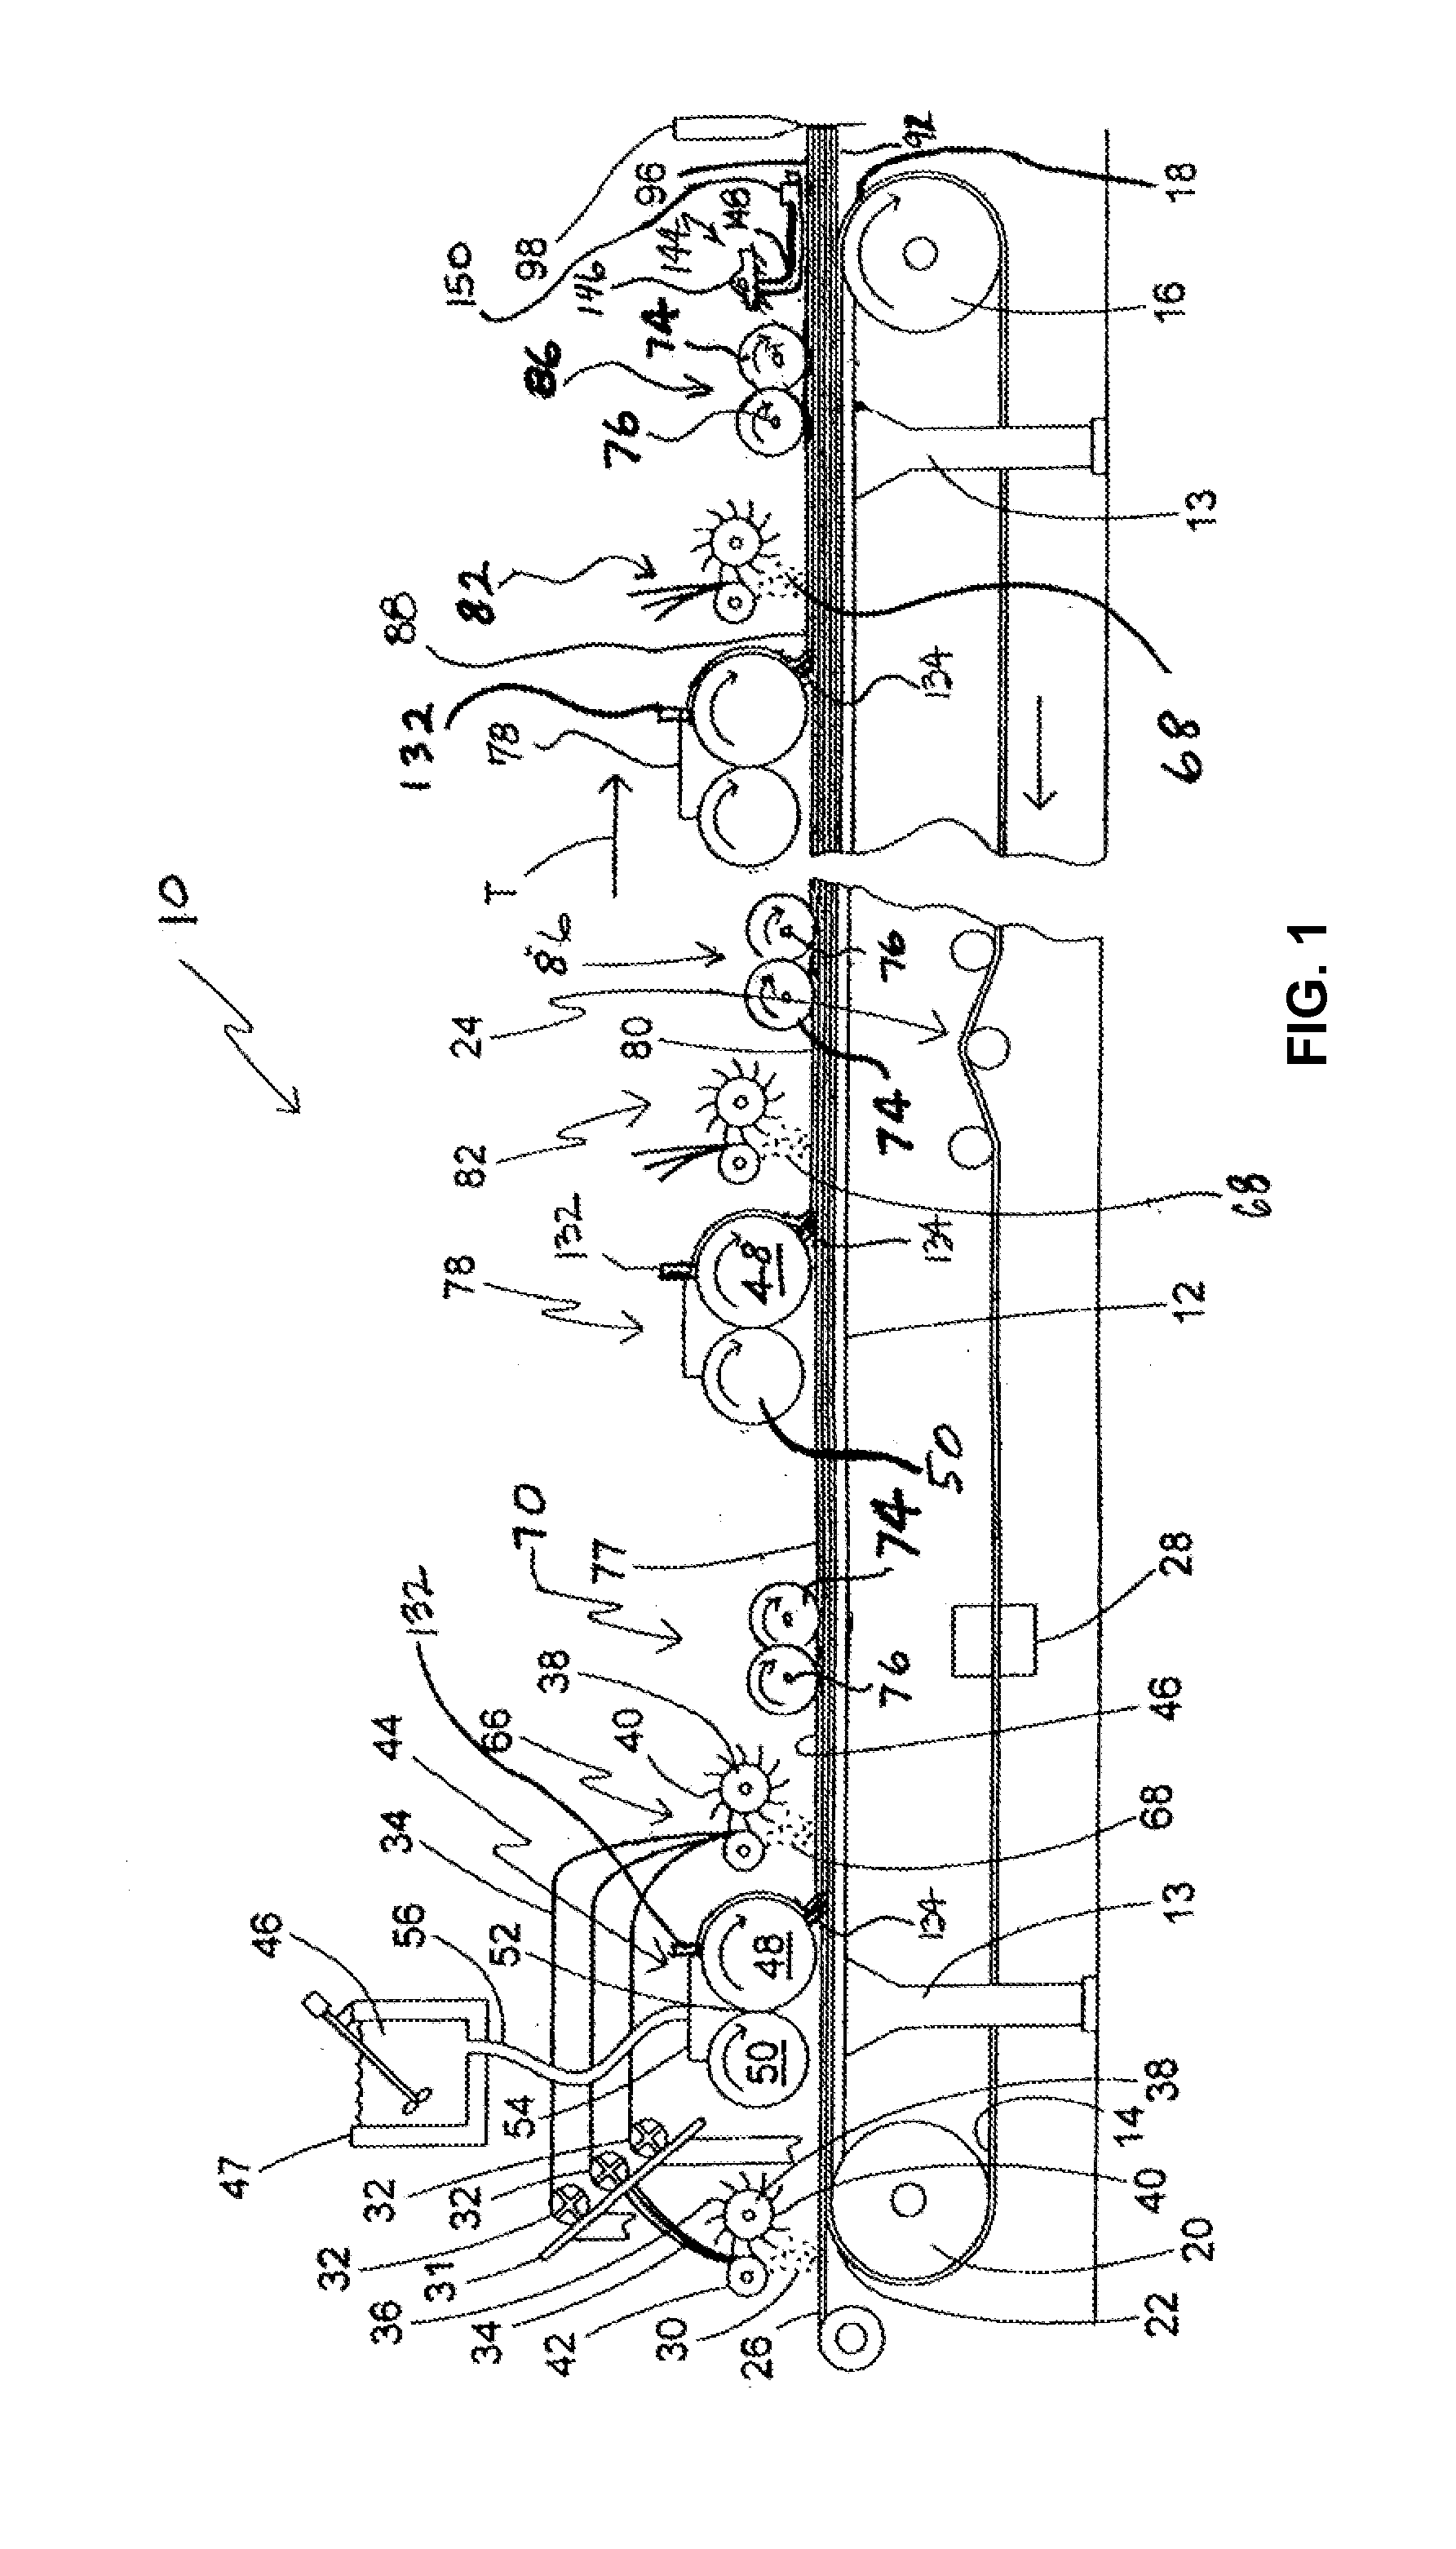 Apparatus and method for wet mixing cementitious slurry for fiber-reinforced structural cement panels